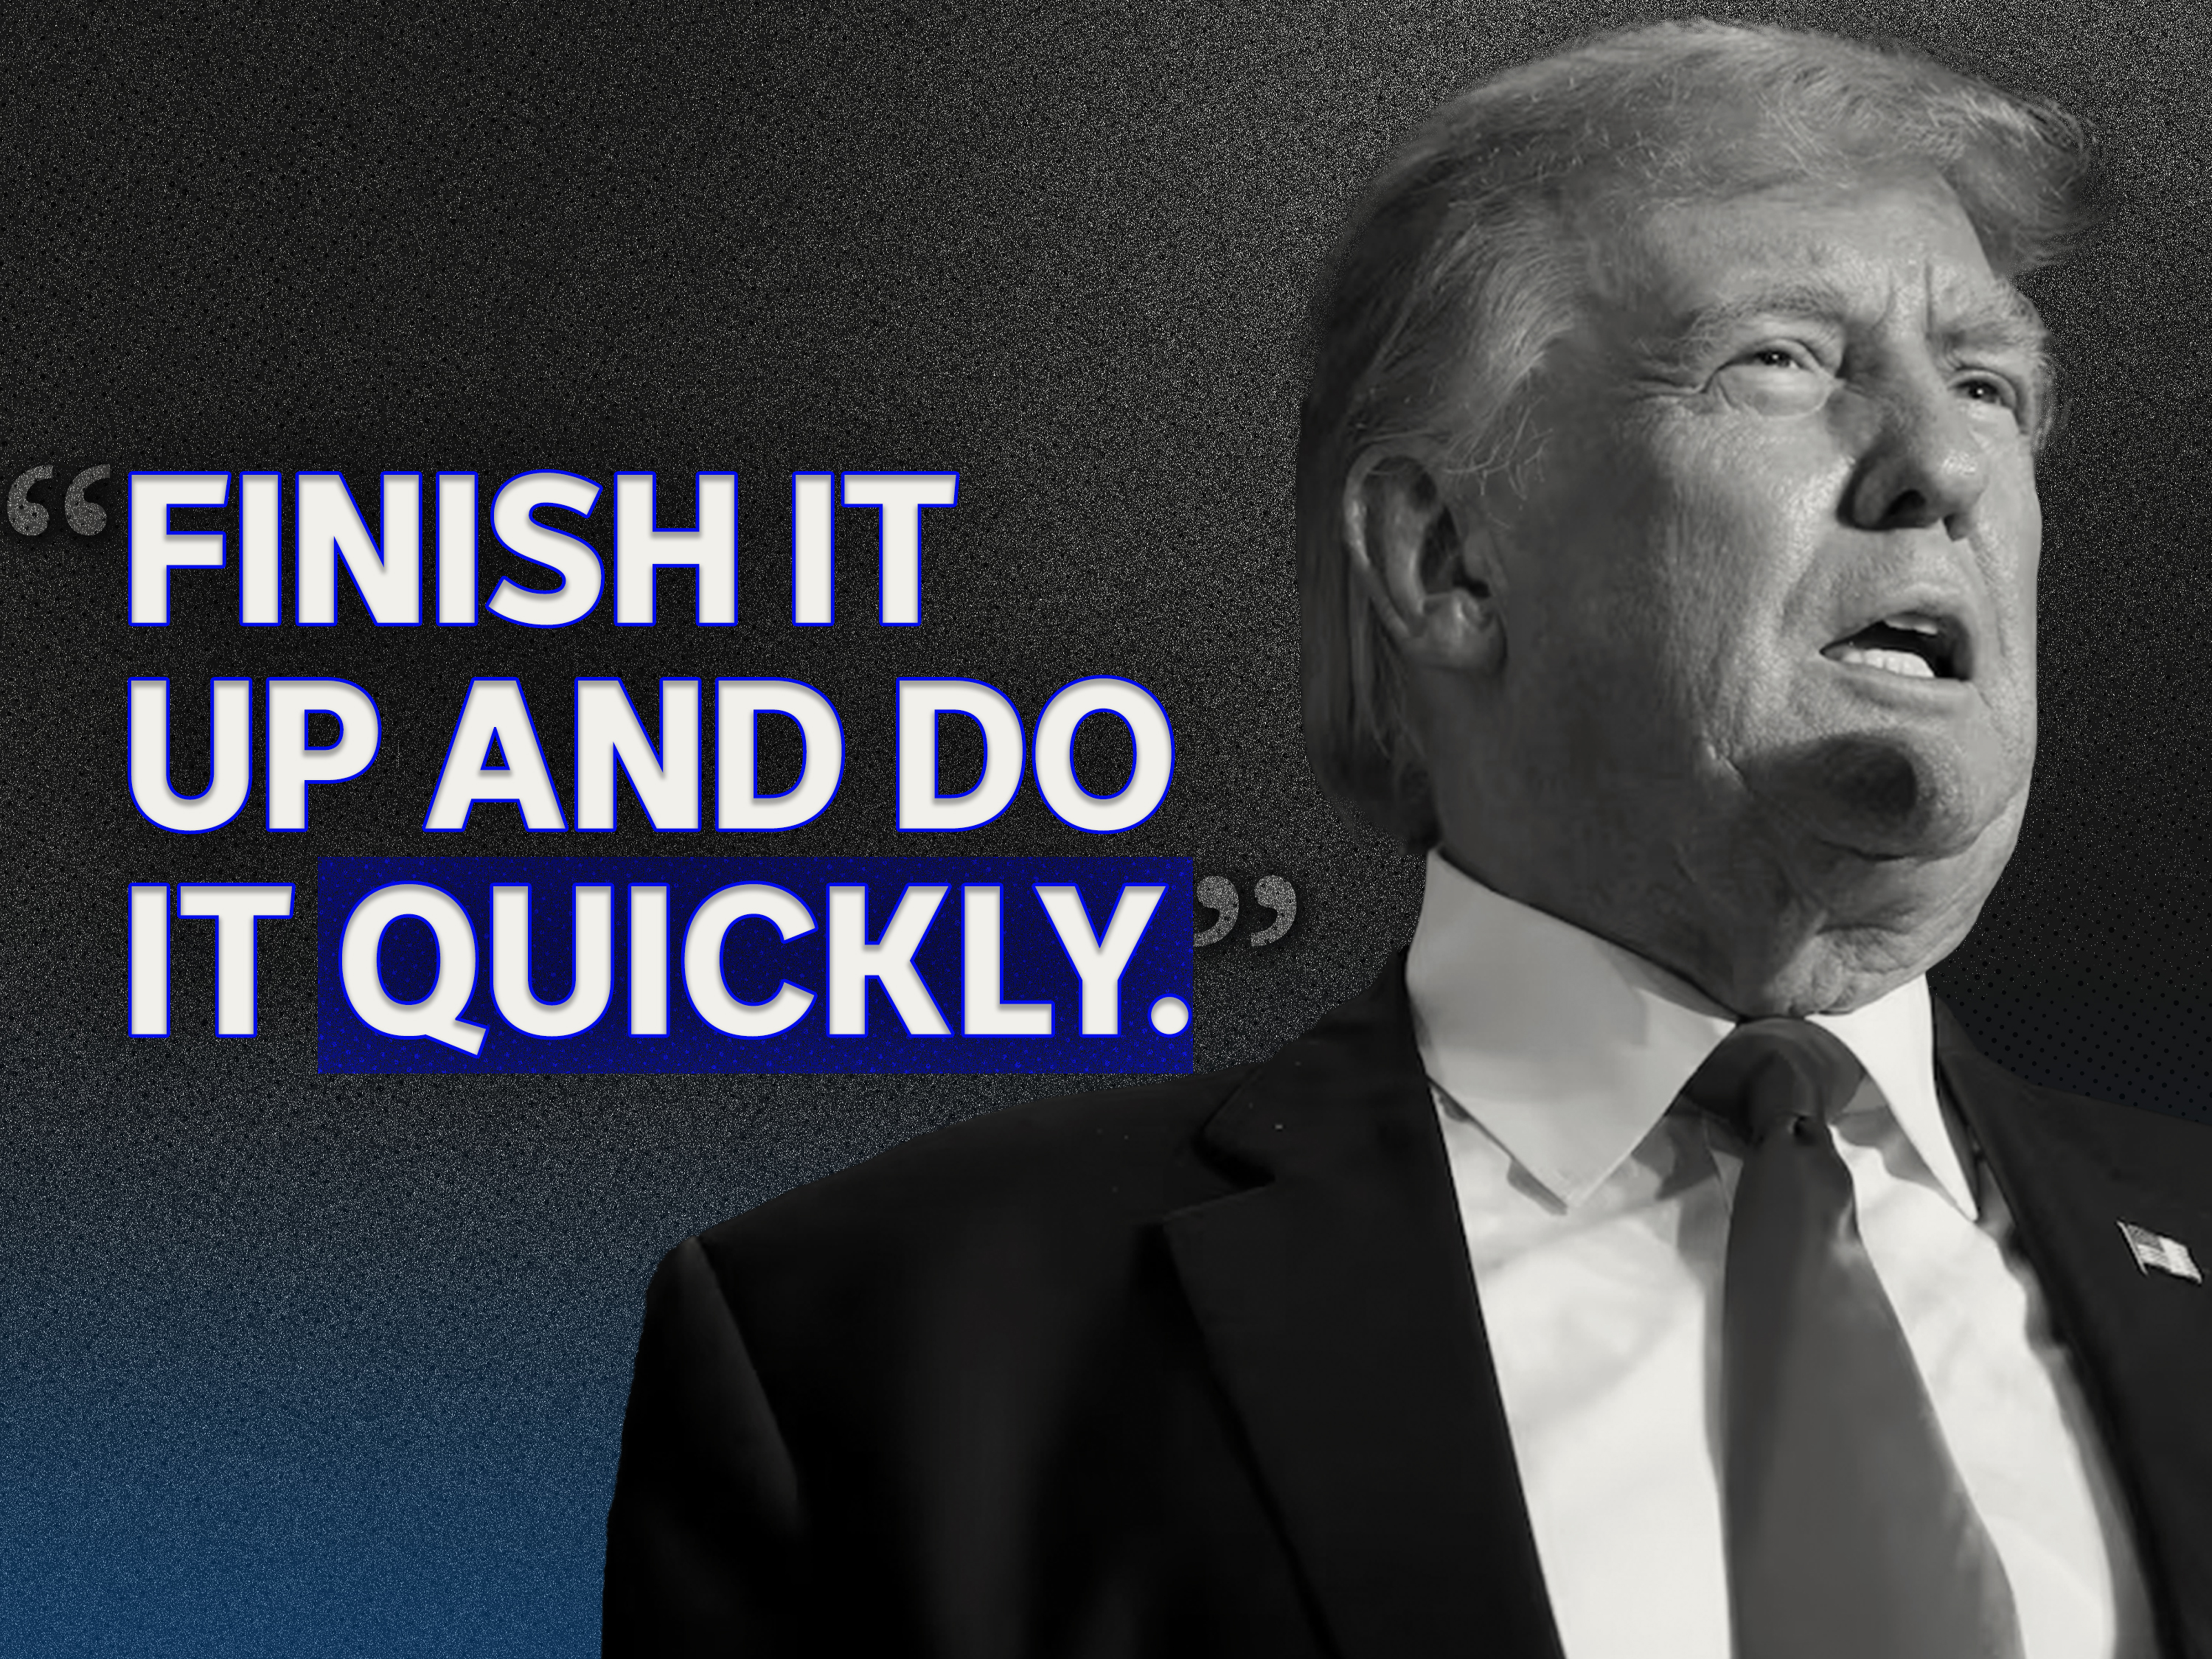 Donald Trump pictured with the words: Finish it up and do it quickly